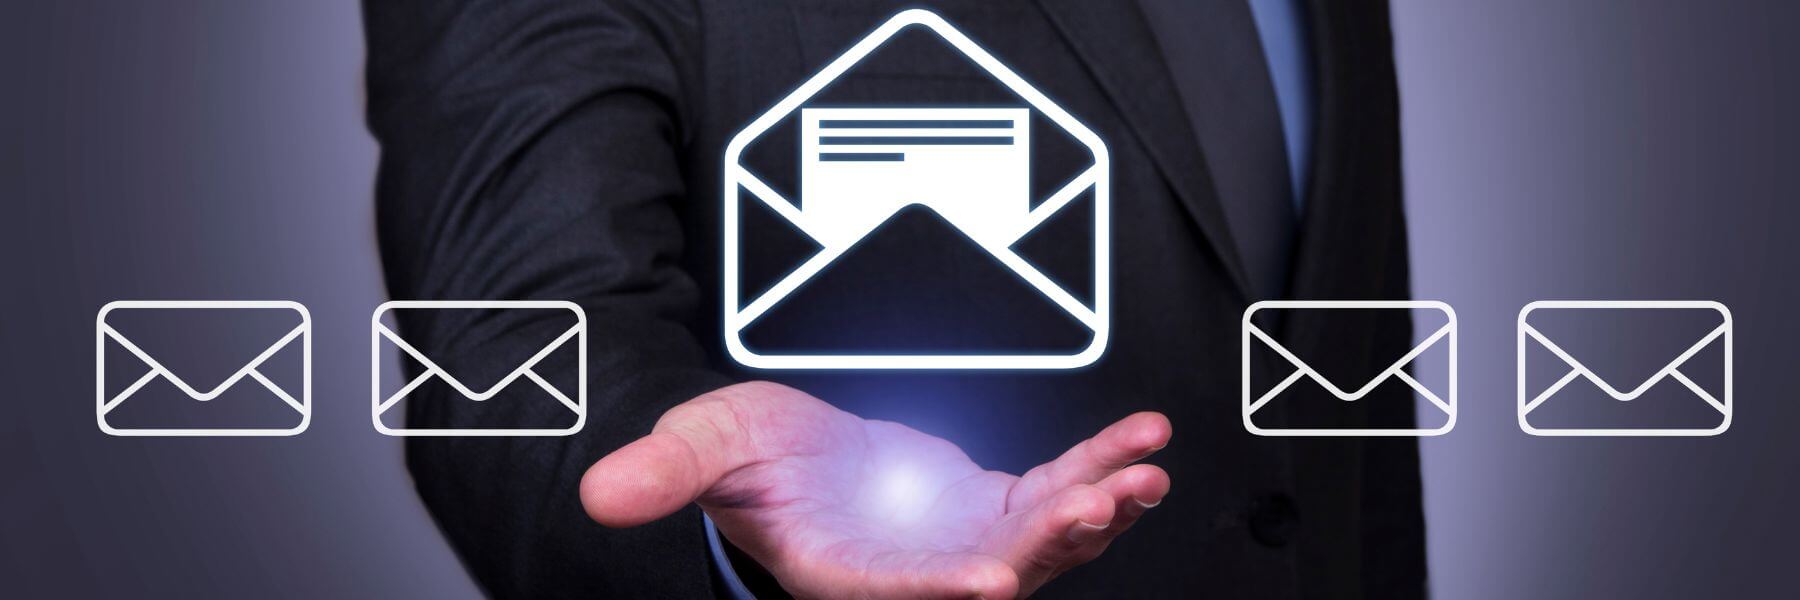 hand facing up, email concept icons above